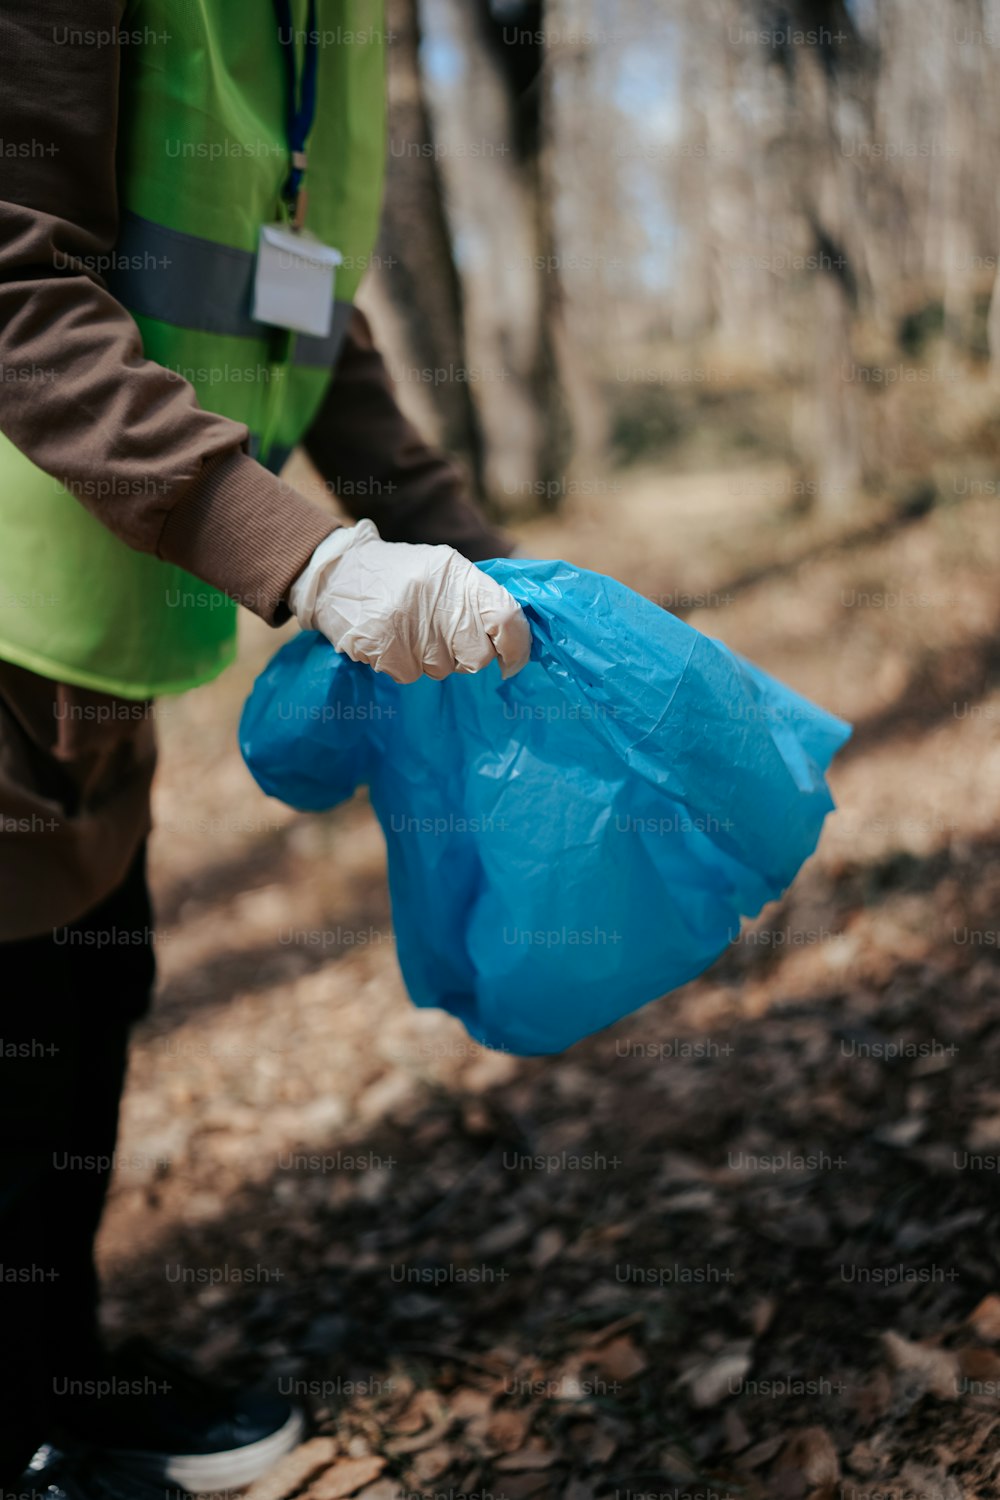 a person in a green vest holding a blue plastic bag